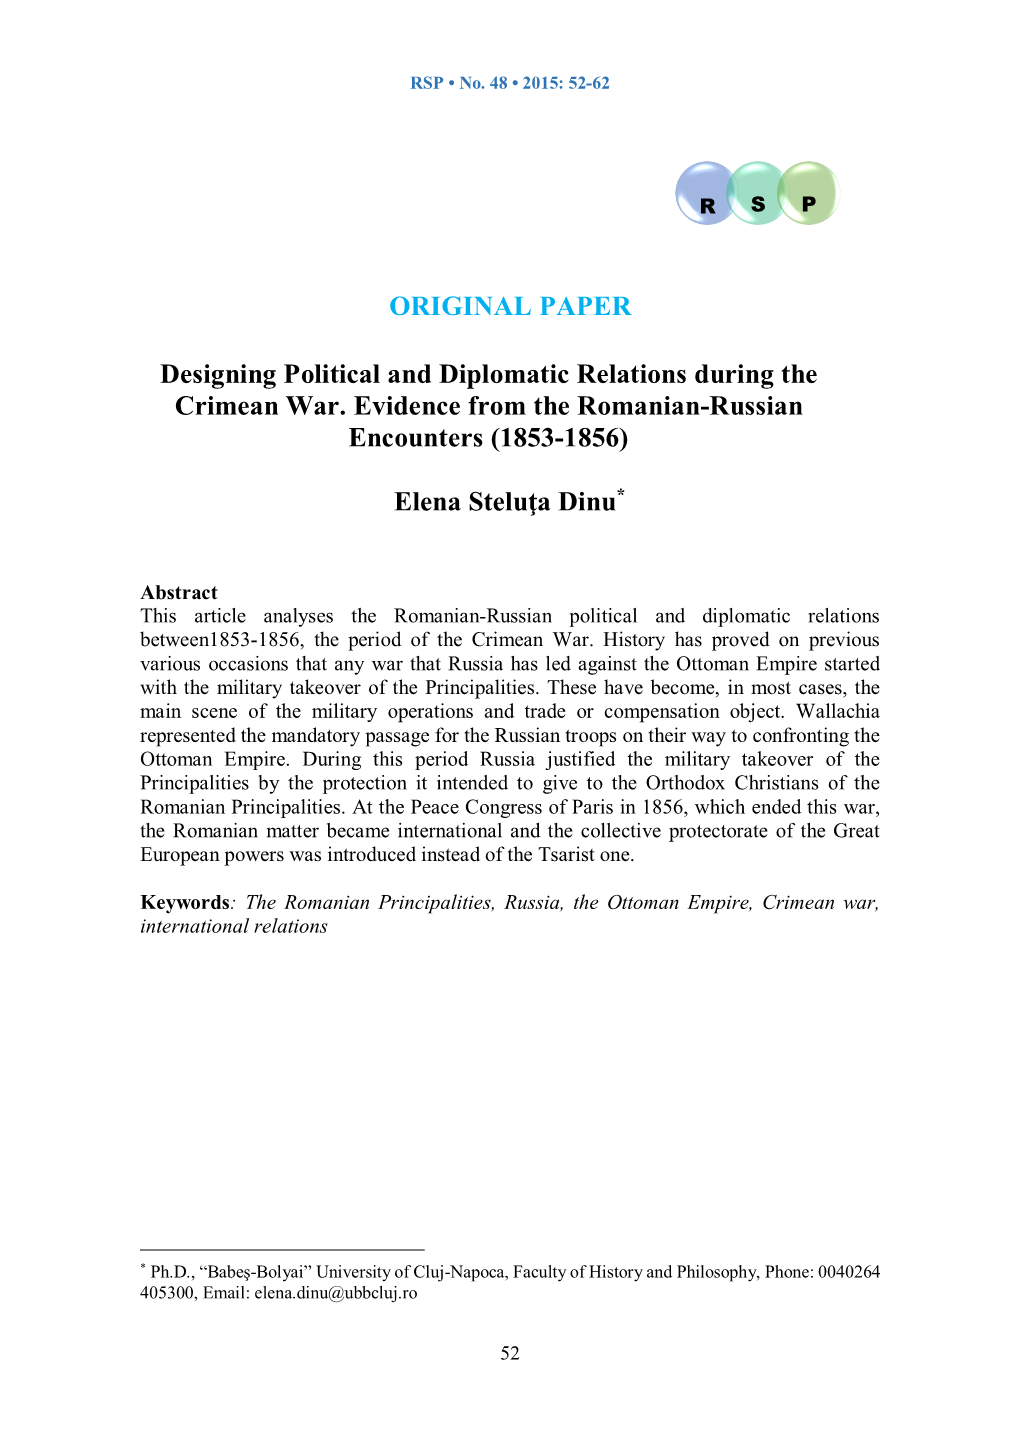 ORIGINAL PAPER Designing Political and Diplomatic Relations During the Crimean War. Evidence from the Romanian-Russian Encounter